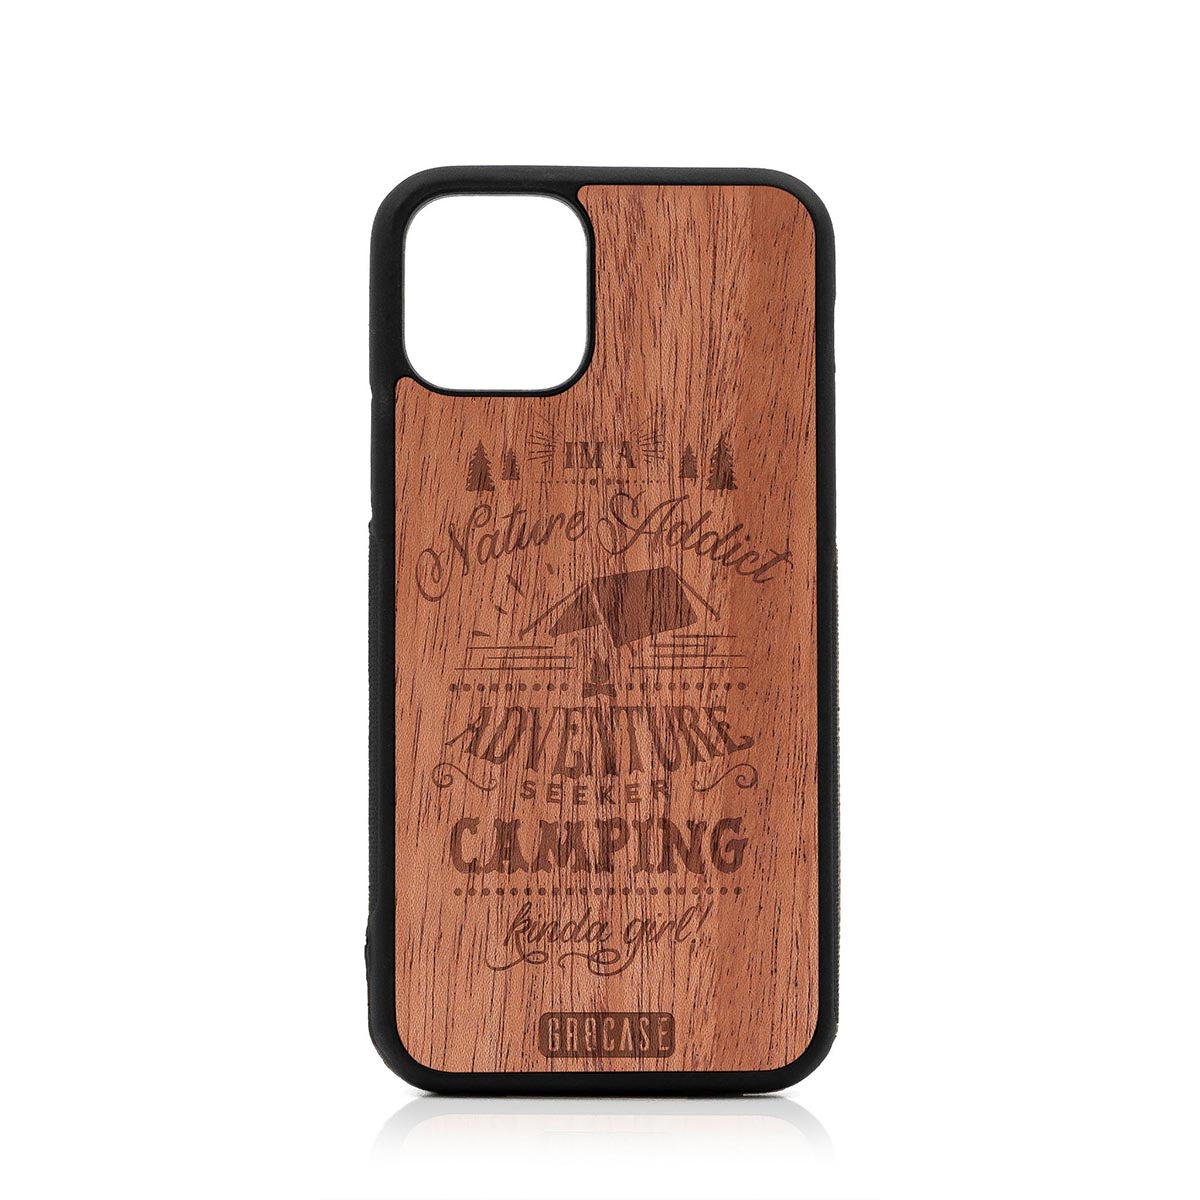 I'm A Nature Addict Adventure Seeker Camping Kinda Girl Design Wood Case For iPhone 11 Pro by GR8CASE